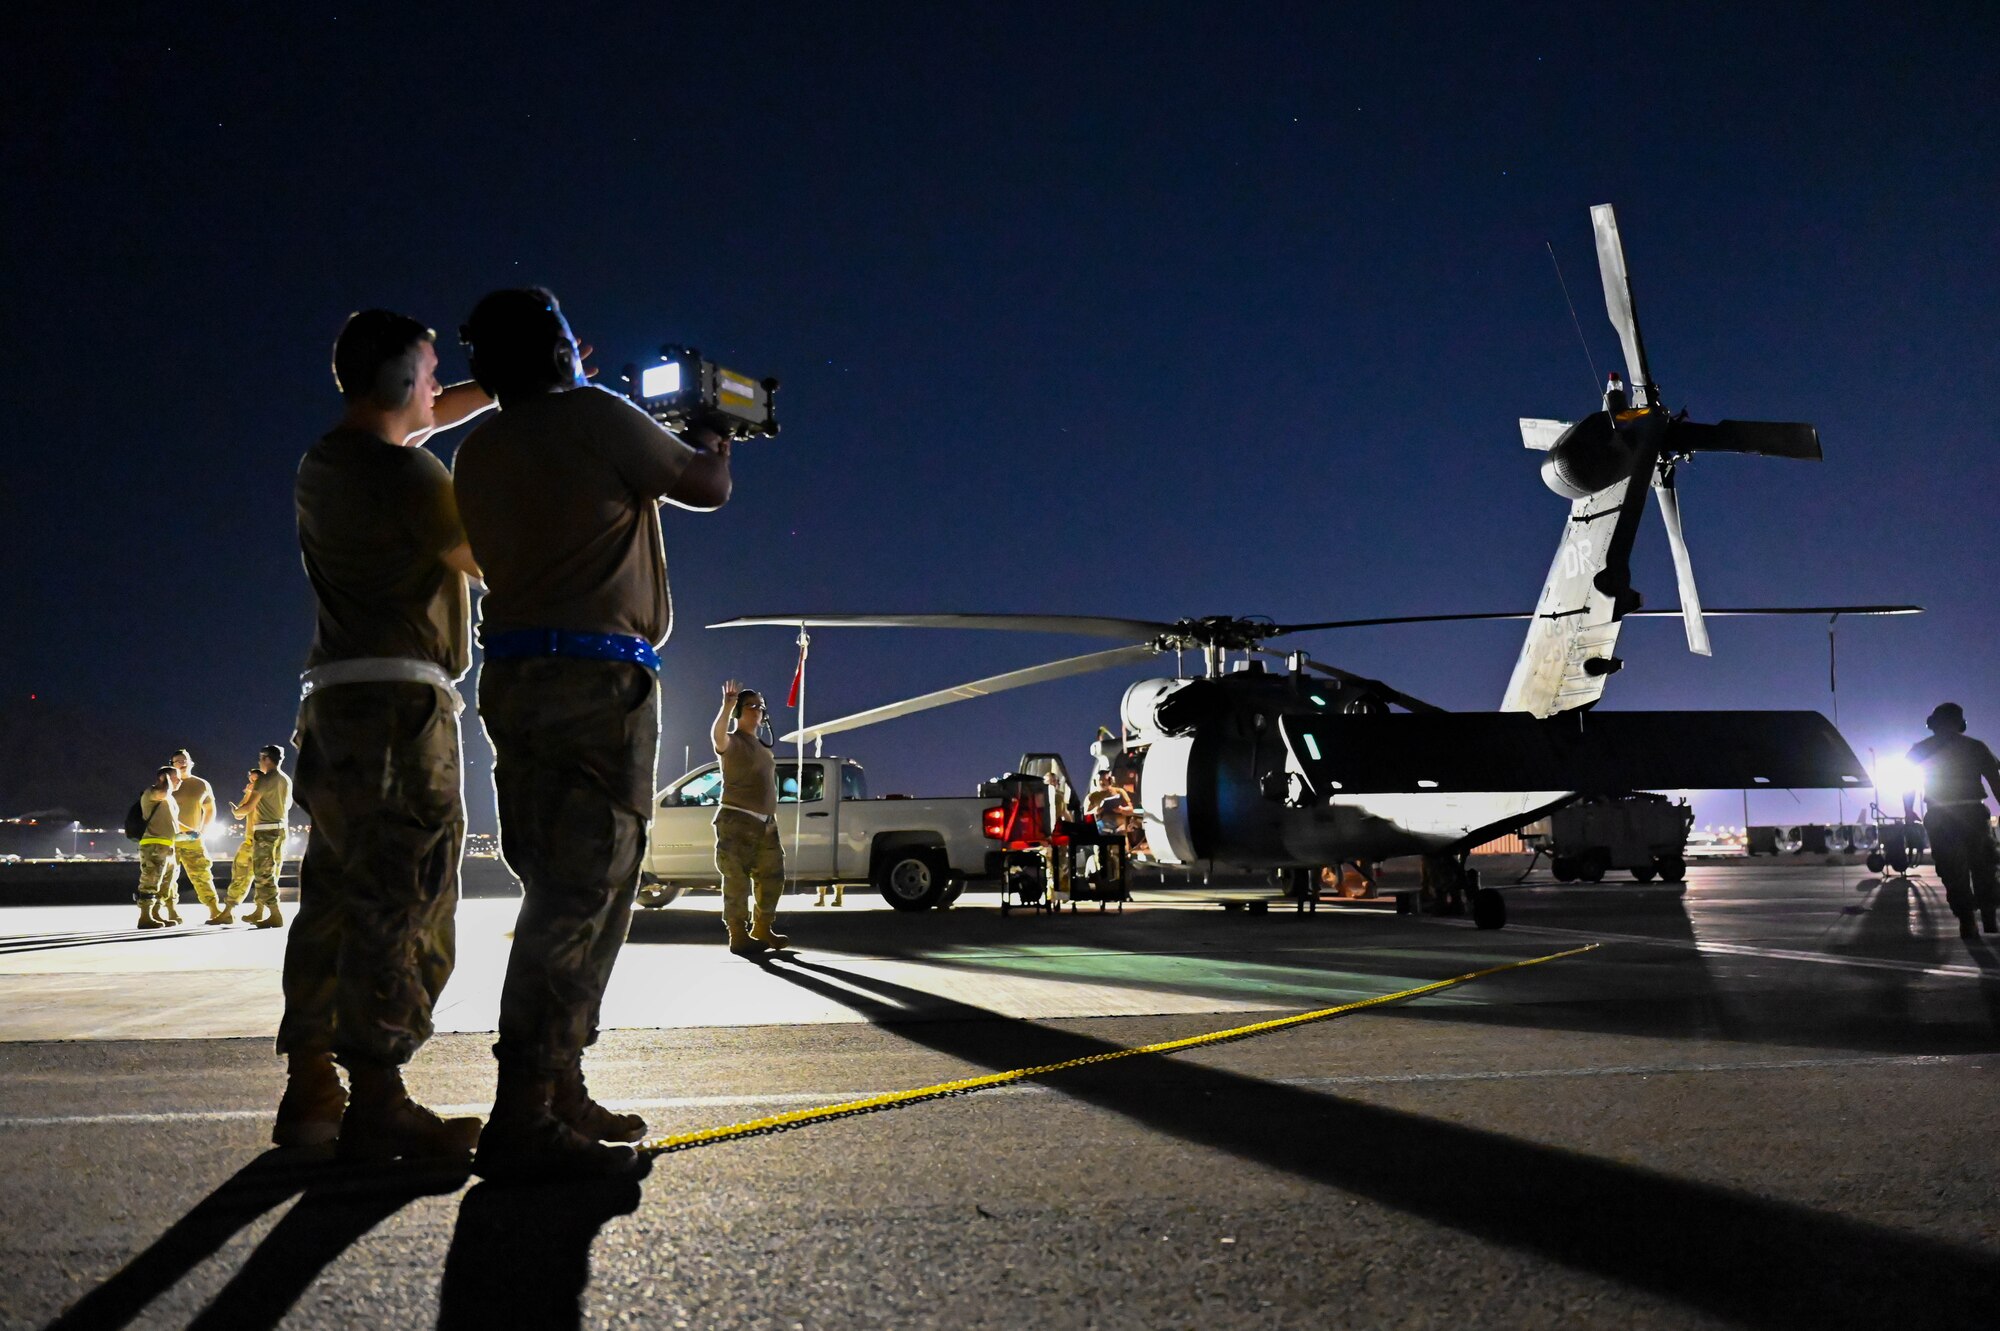 Airmen from the 87th Electronic Warfare Squadron conduct a missile systems operations check on an HH-60G Pavehawk as part of COMBAT SHIELD during Red Flag 23-3 at Nellis Air Force Base, Nev., July 14, 2023. The equipment simulates a threat to the aircraft which the on-board-system will detect. (U.S. Air Force photo by Capt. Benjamin Aronson)